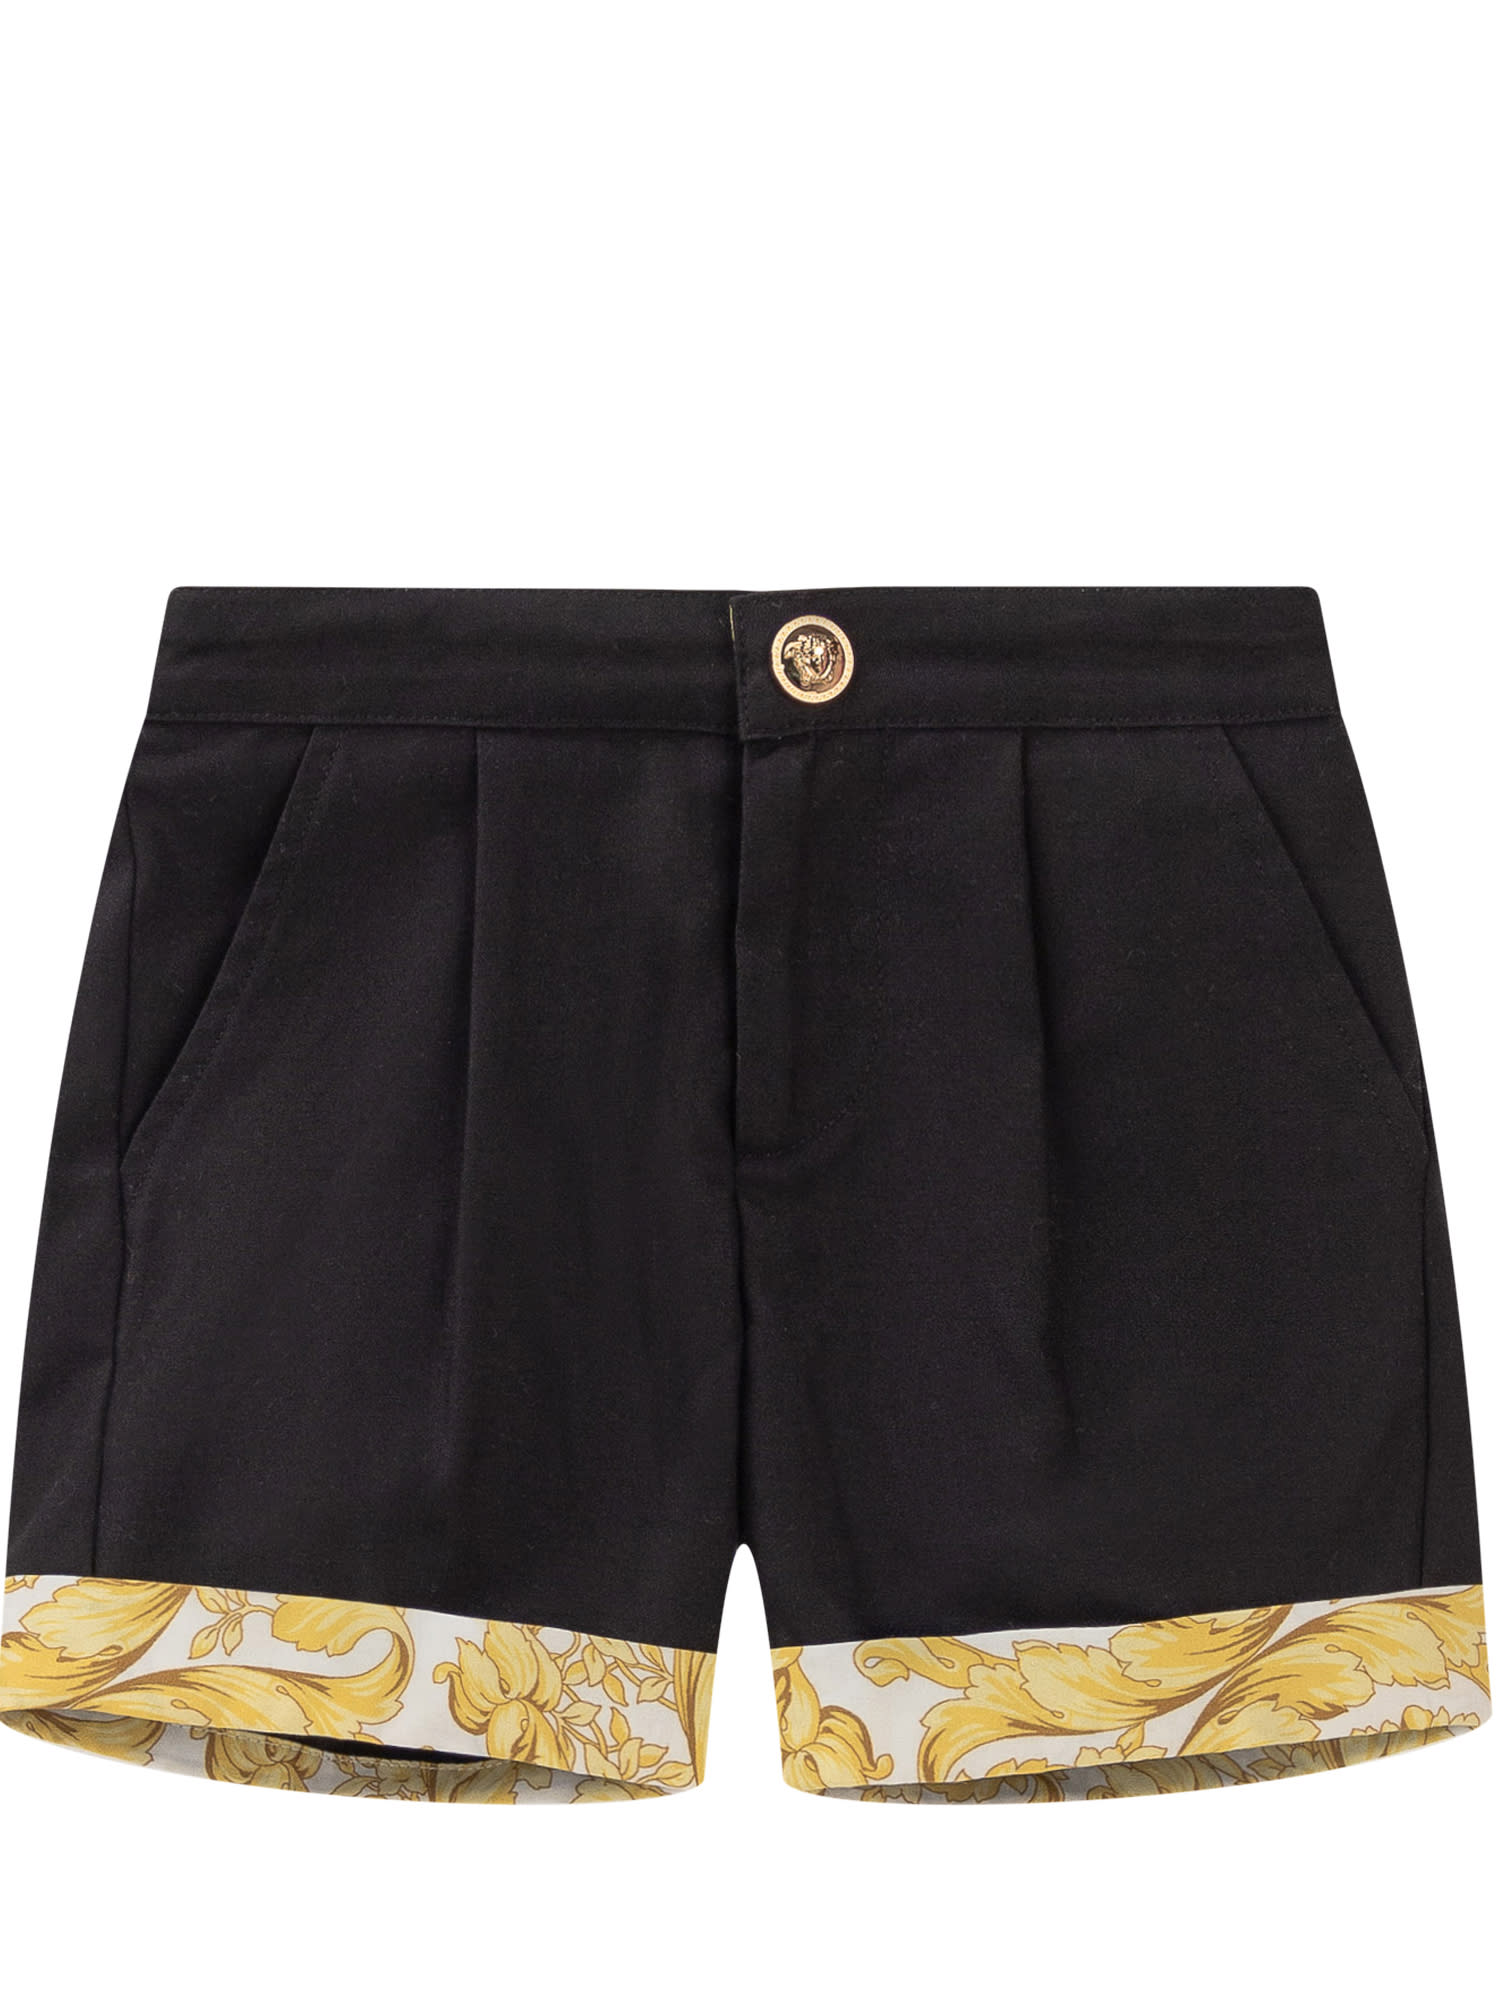 VERSACE SHORTS WITH BAROCCO